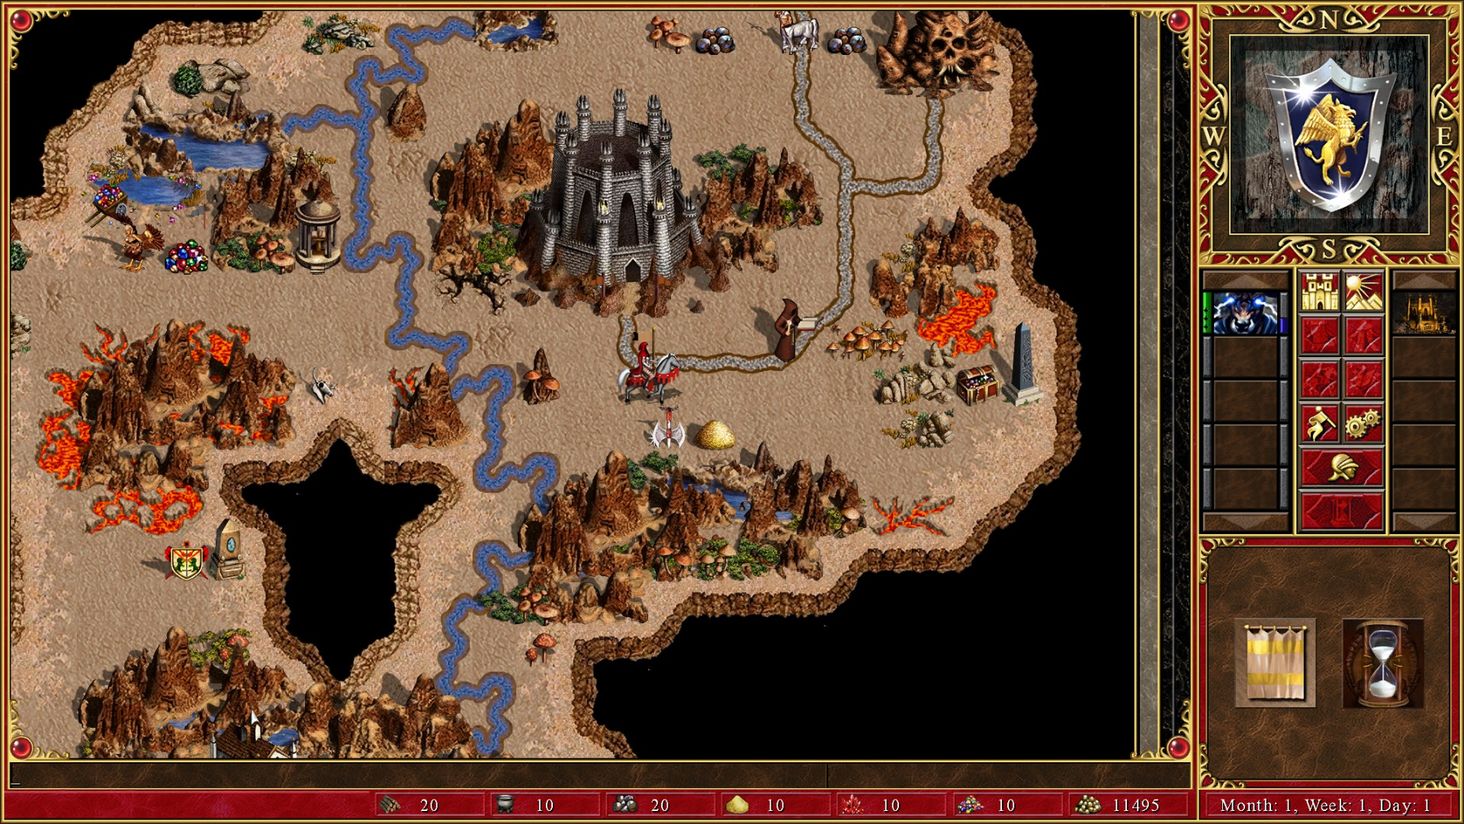 heroes of might and magic 3 hd addon